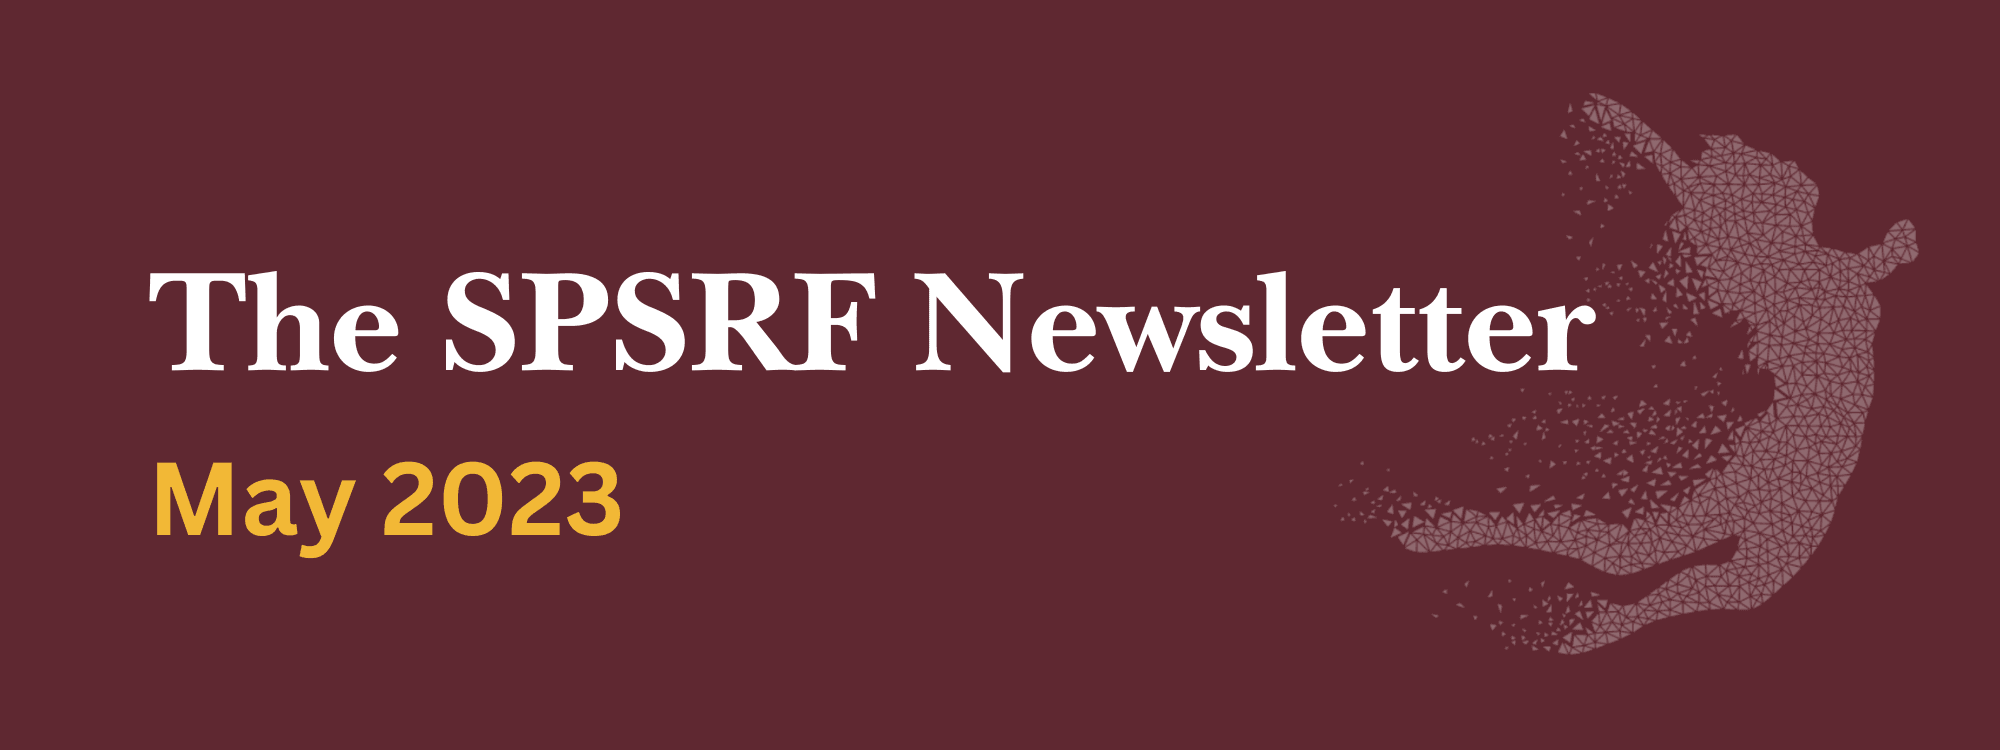 The SPSRF Newsletter May 2023